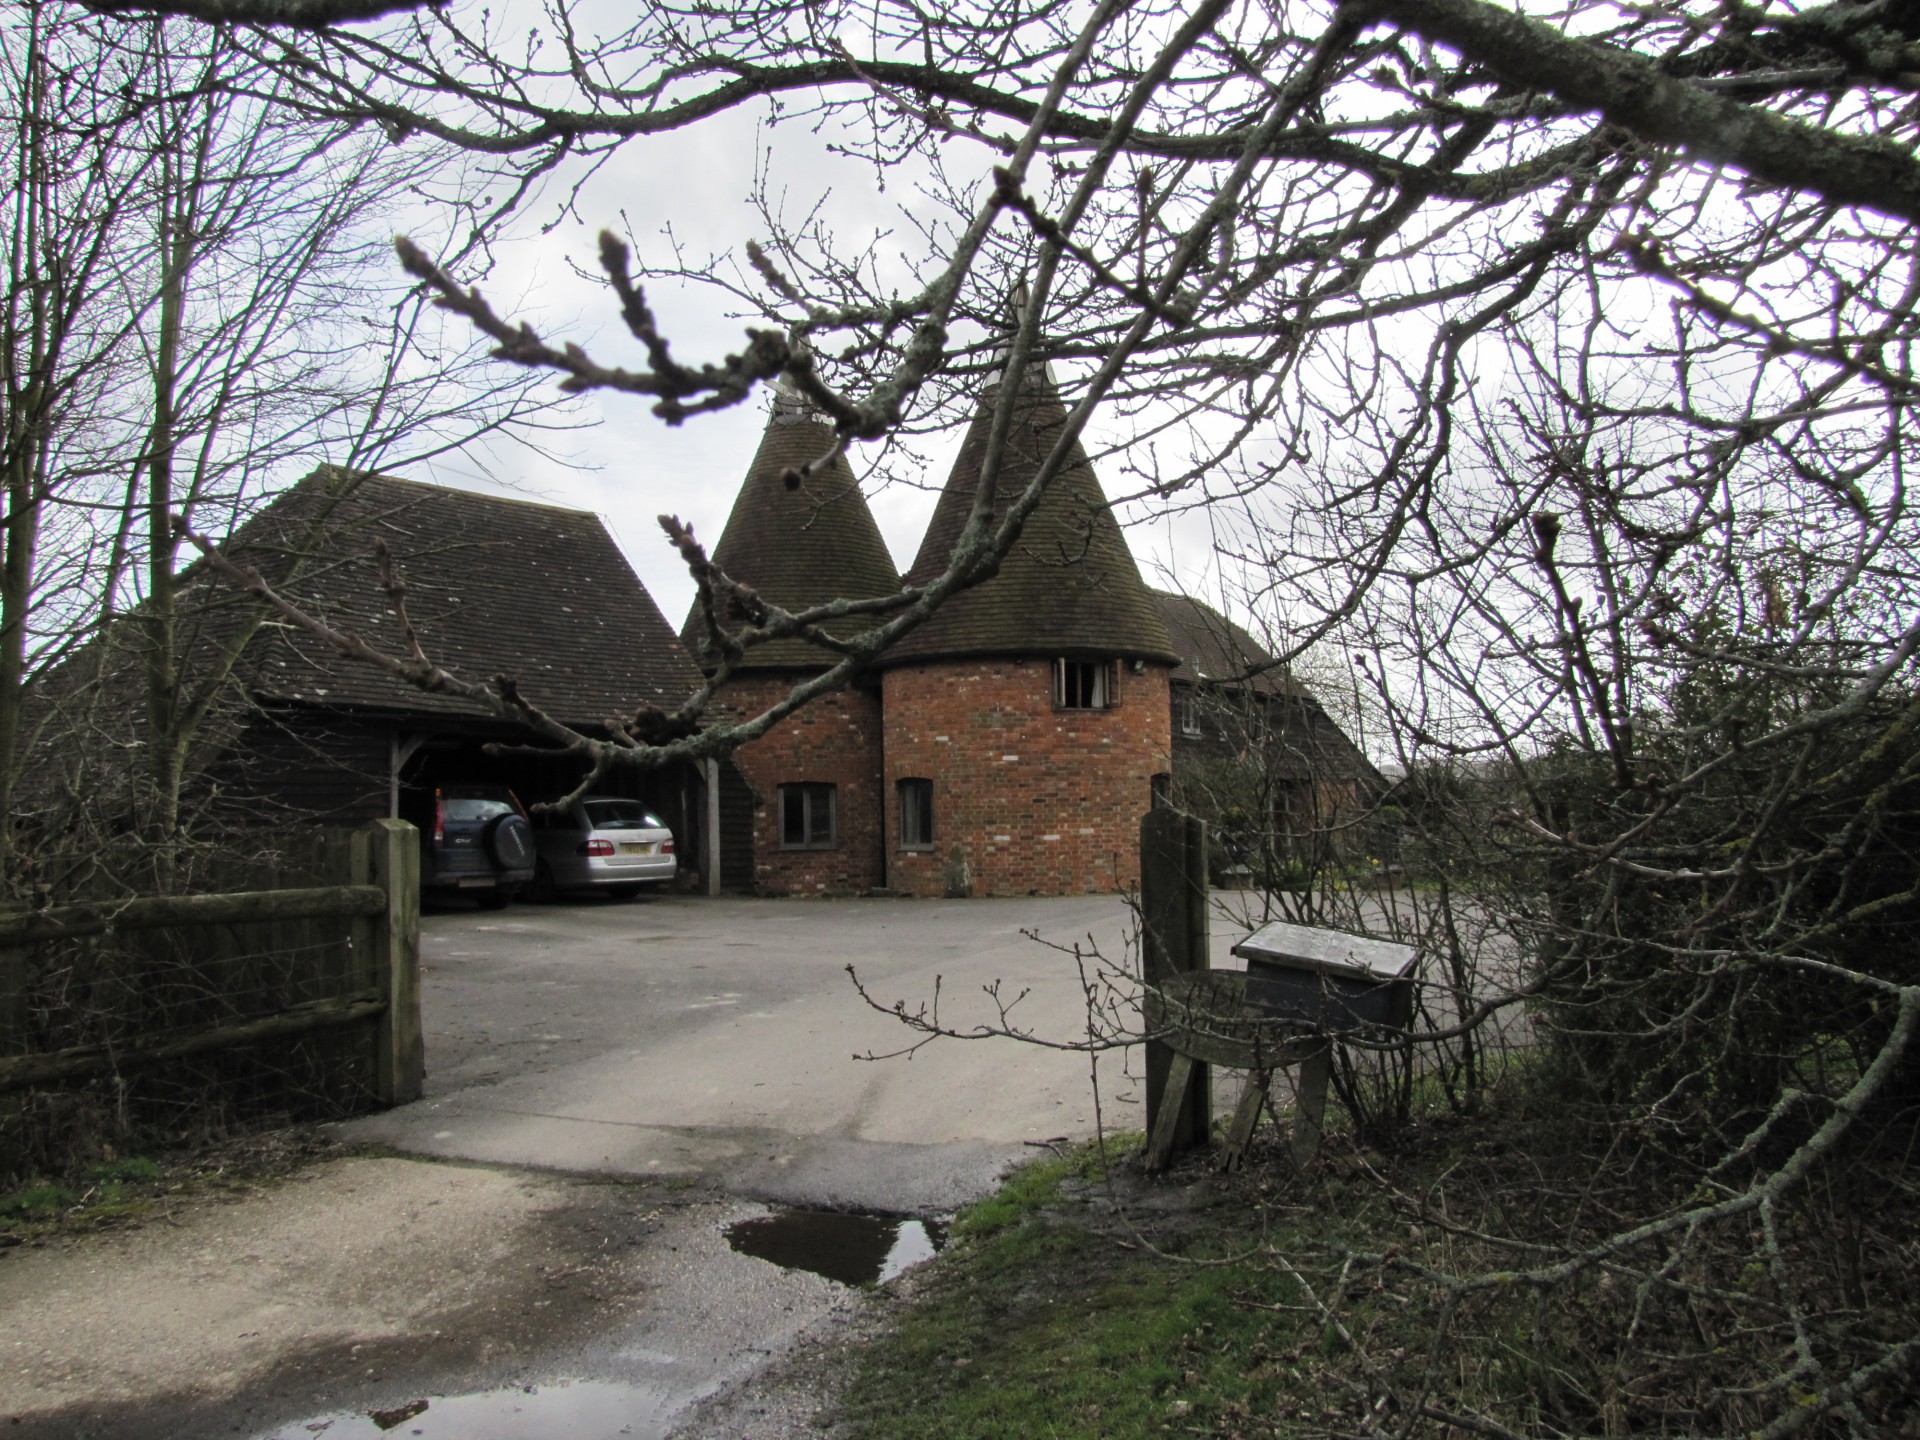 granary oast house country cottage free photo